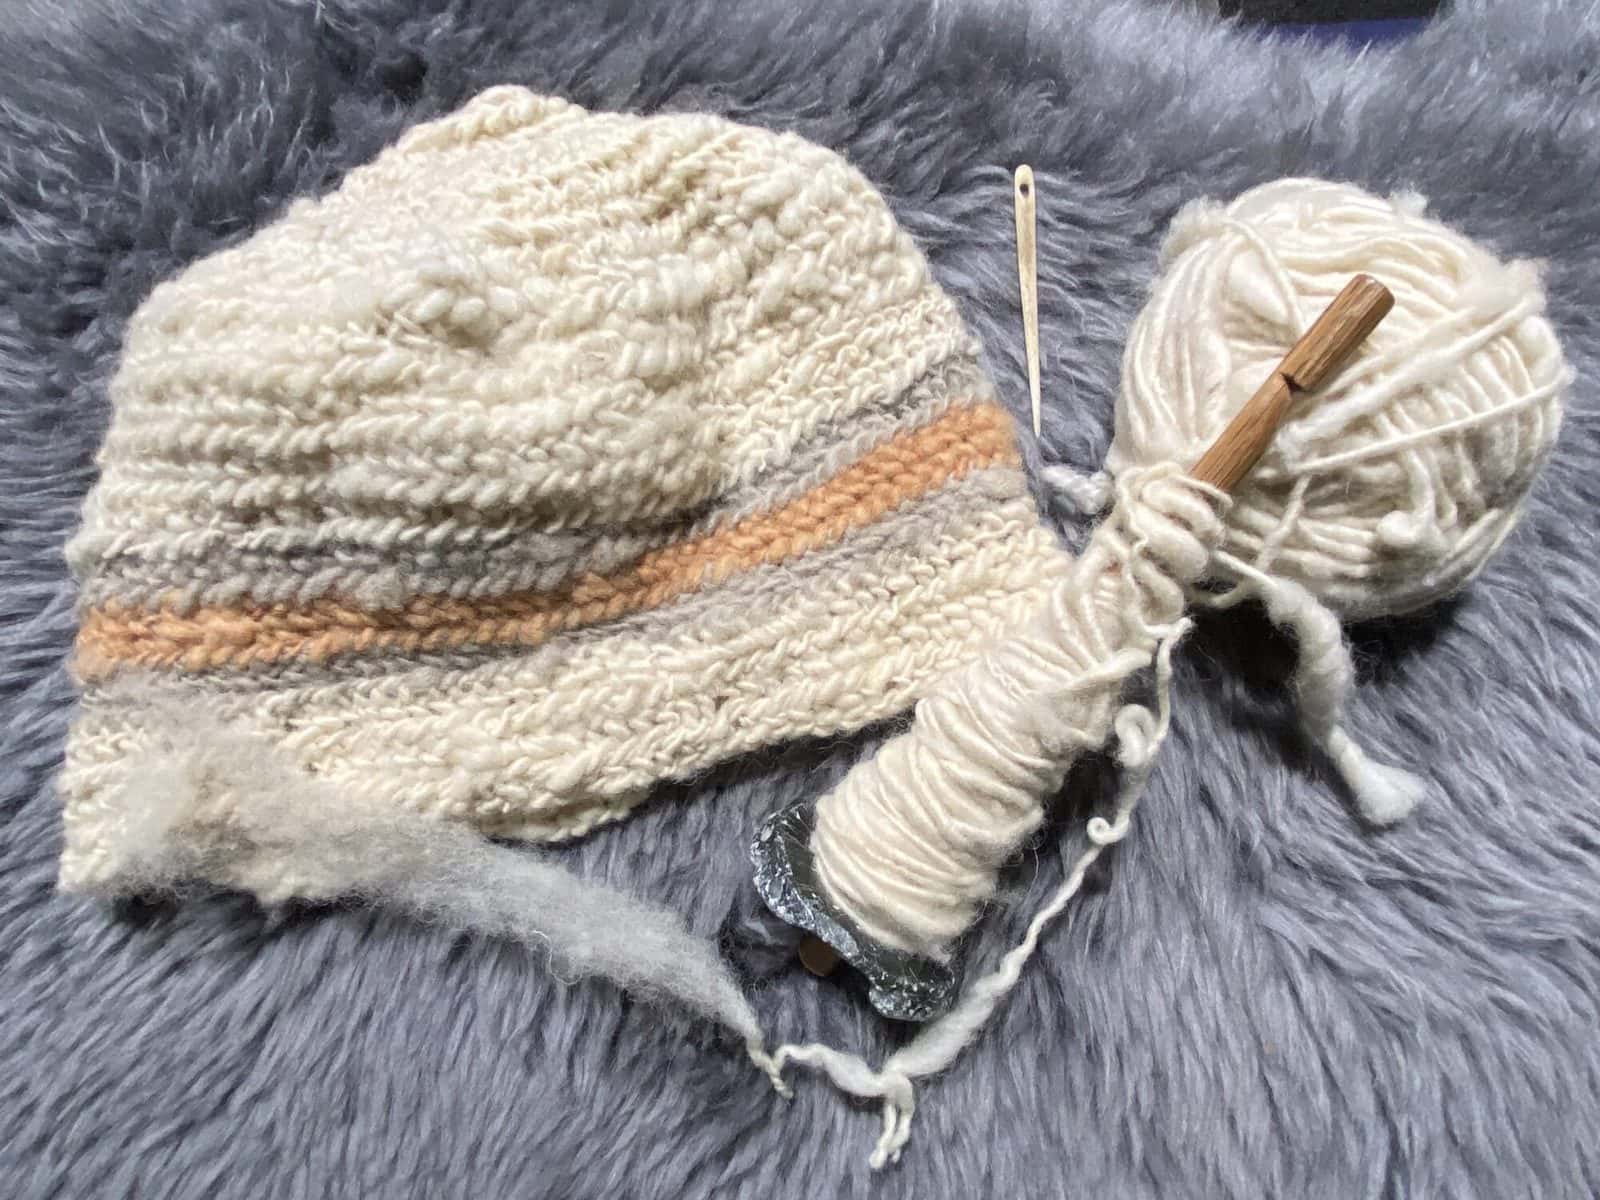 image description: a partially completed hat, beside a ball of handspun yarn and a drop spindle full of wool